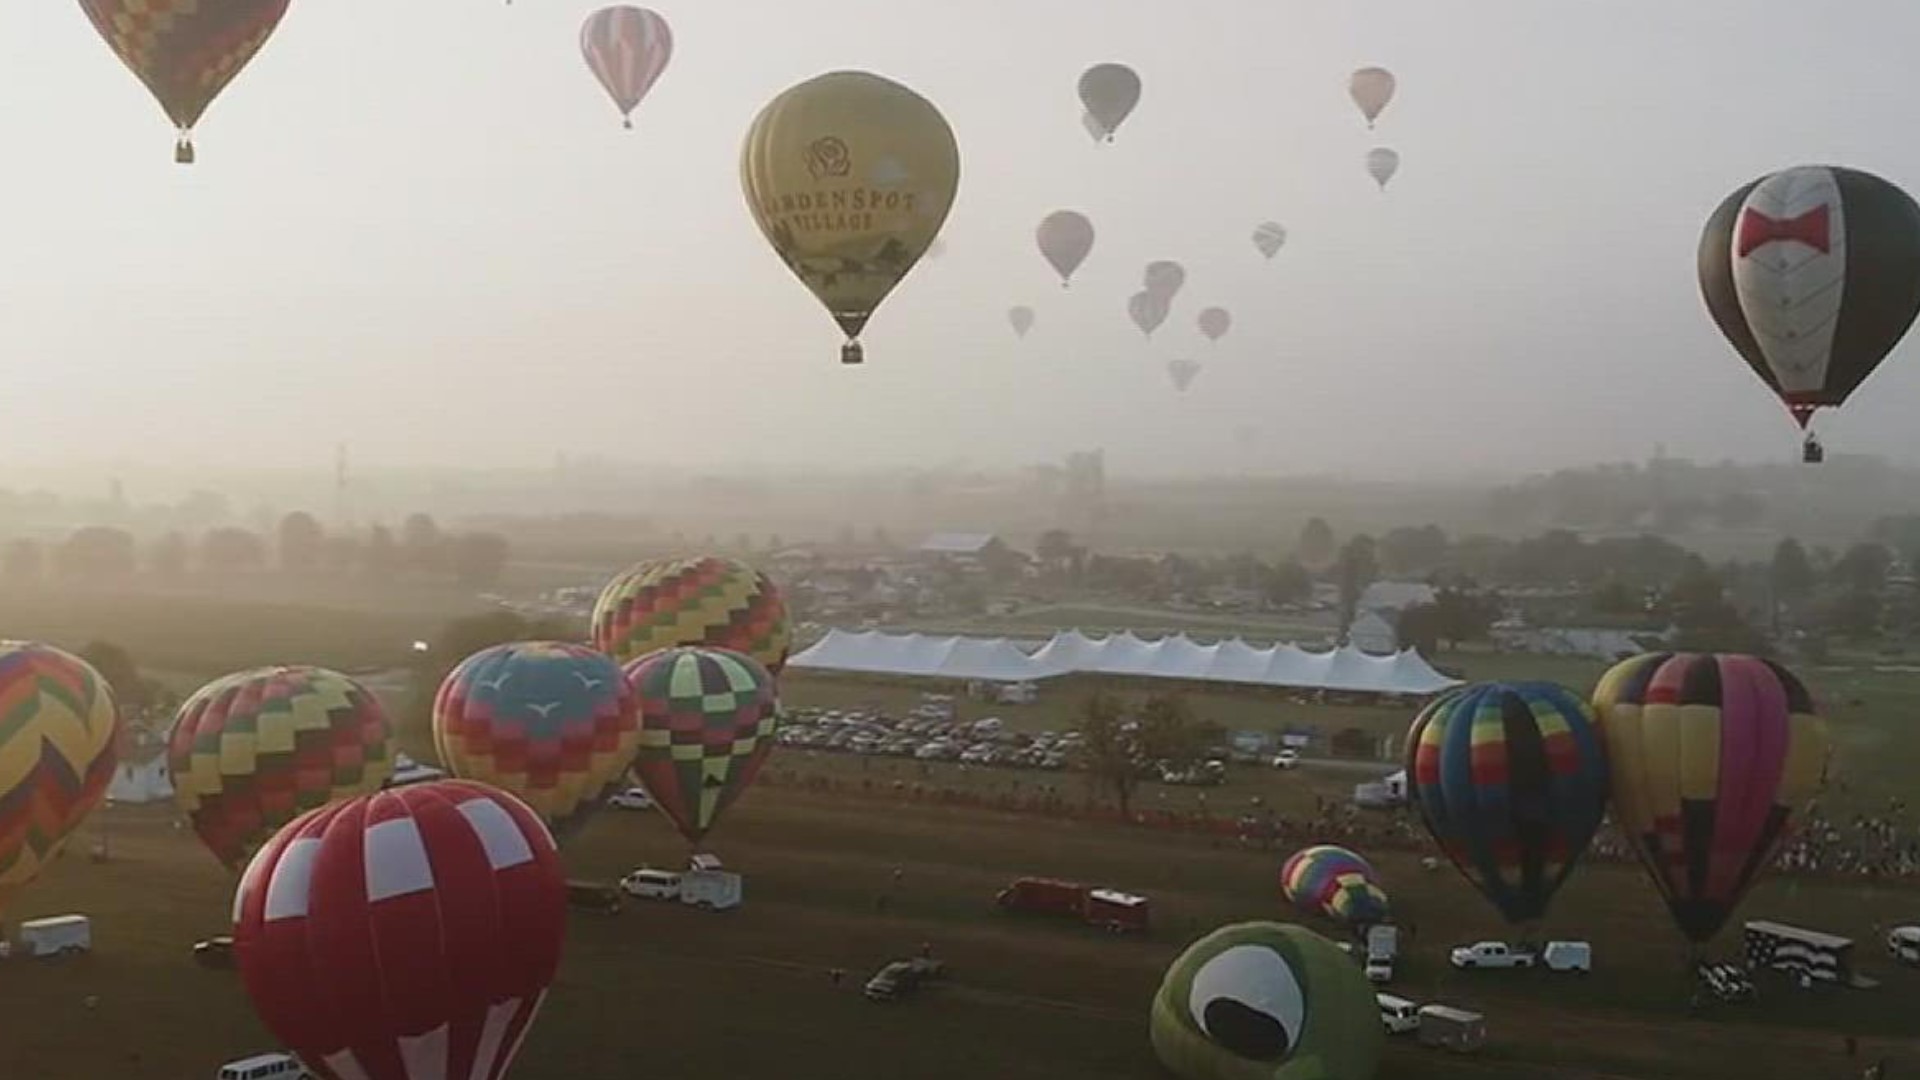 More than 20 balloons are expected to take flight throughout the weekend during the second-largest balloon festival on the East Coast.